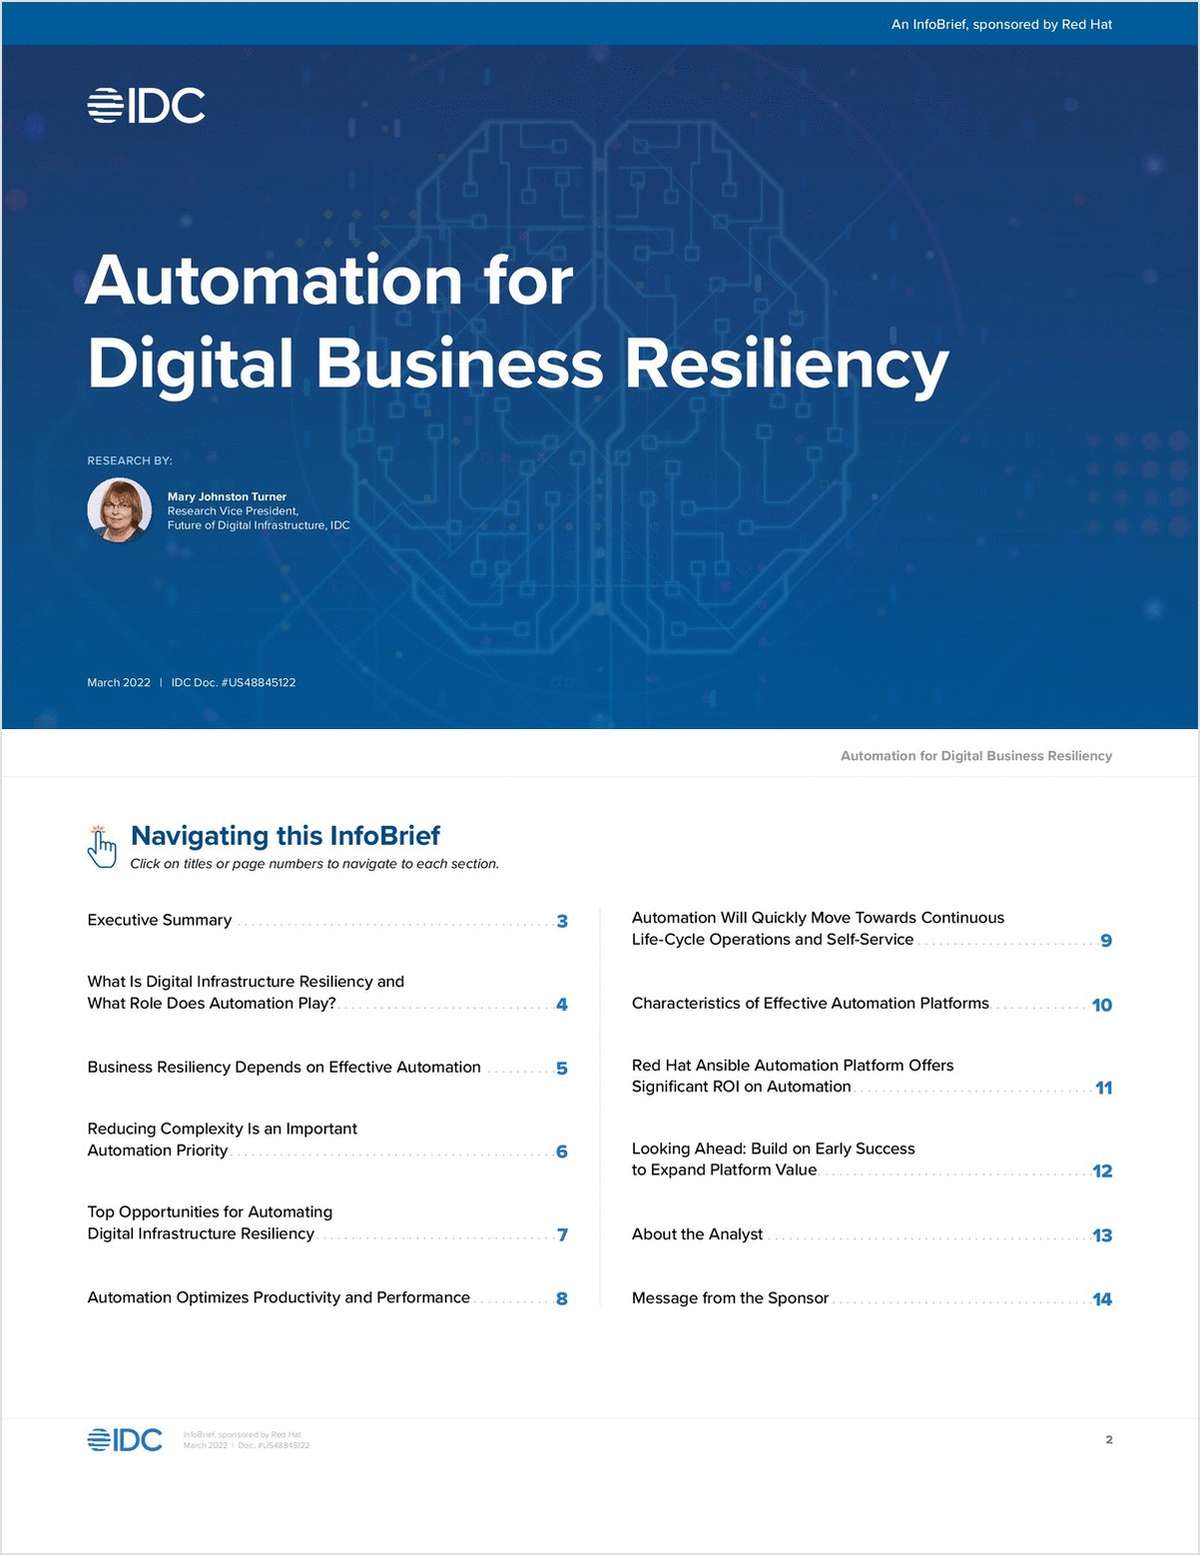 Automation for Digital Business Resiliency